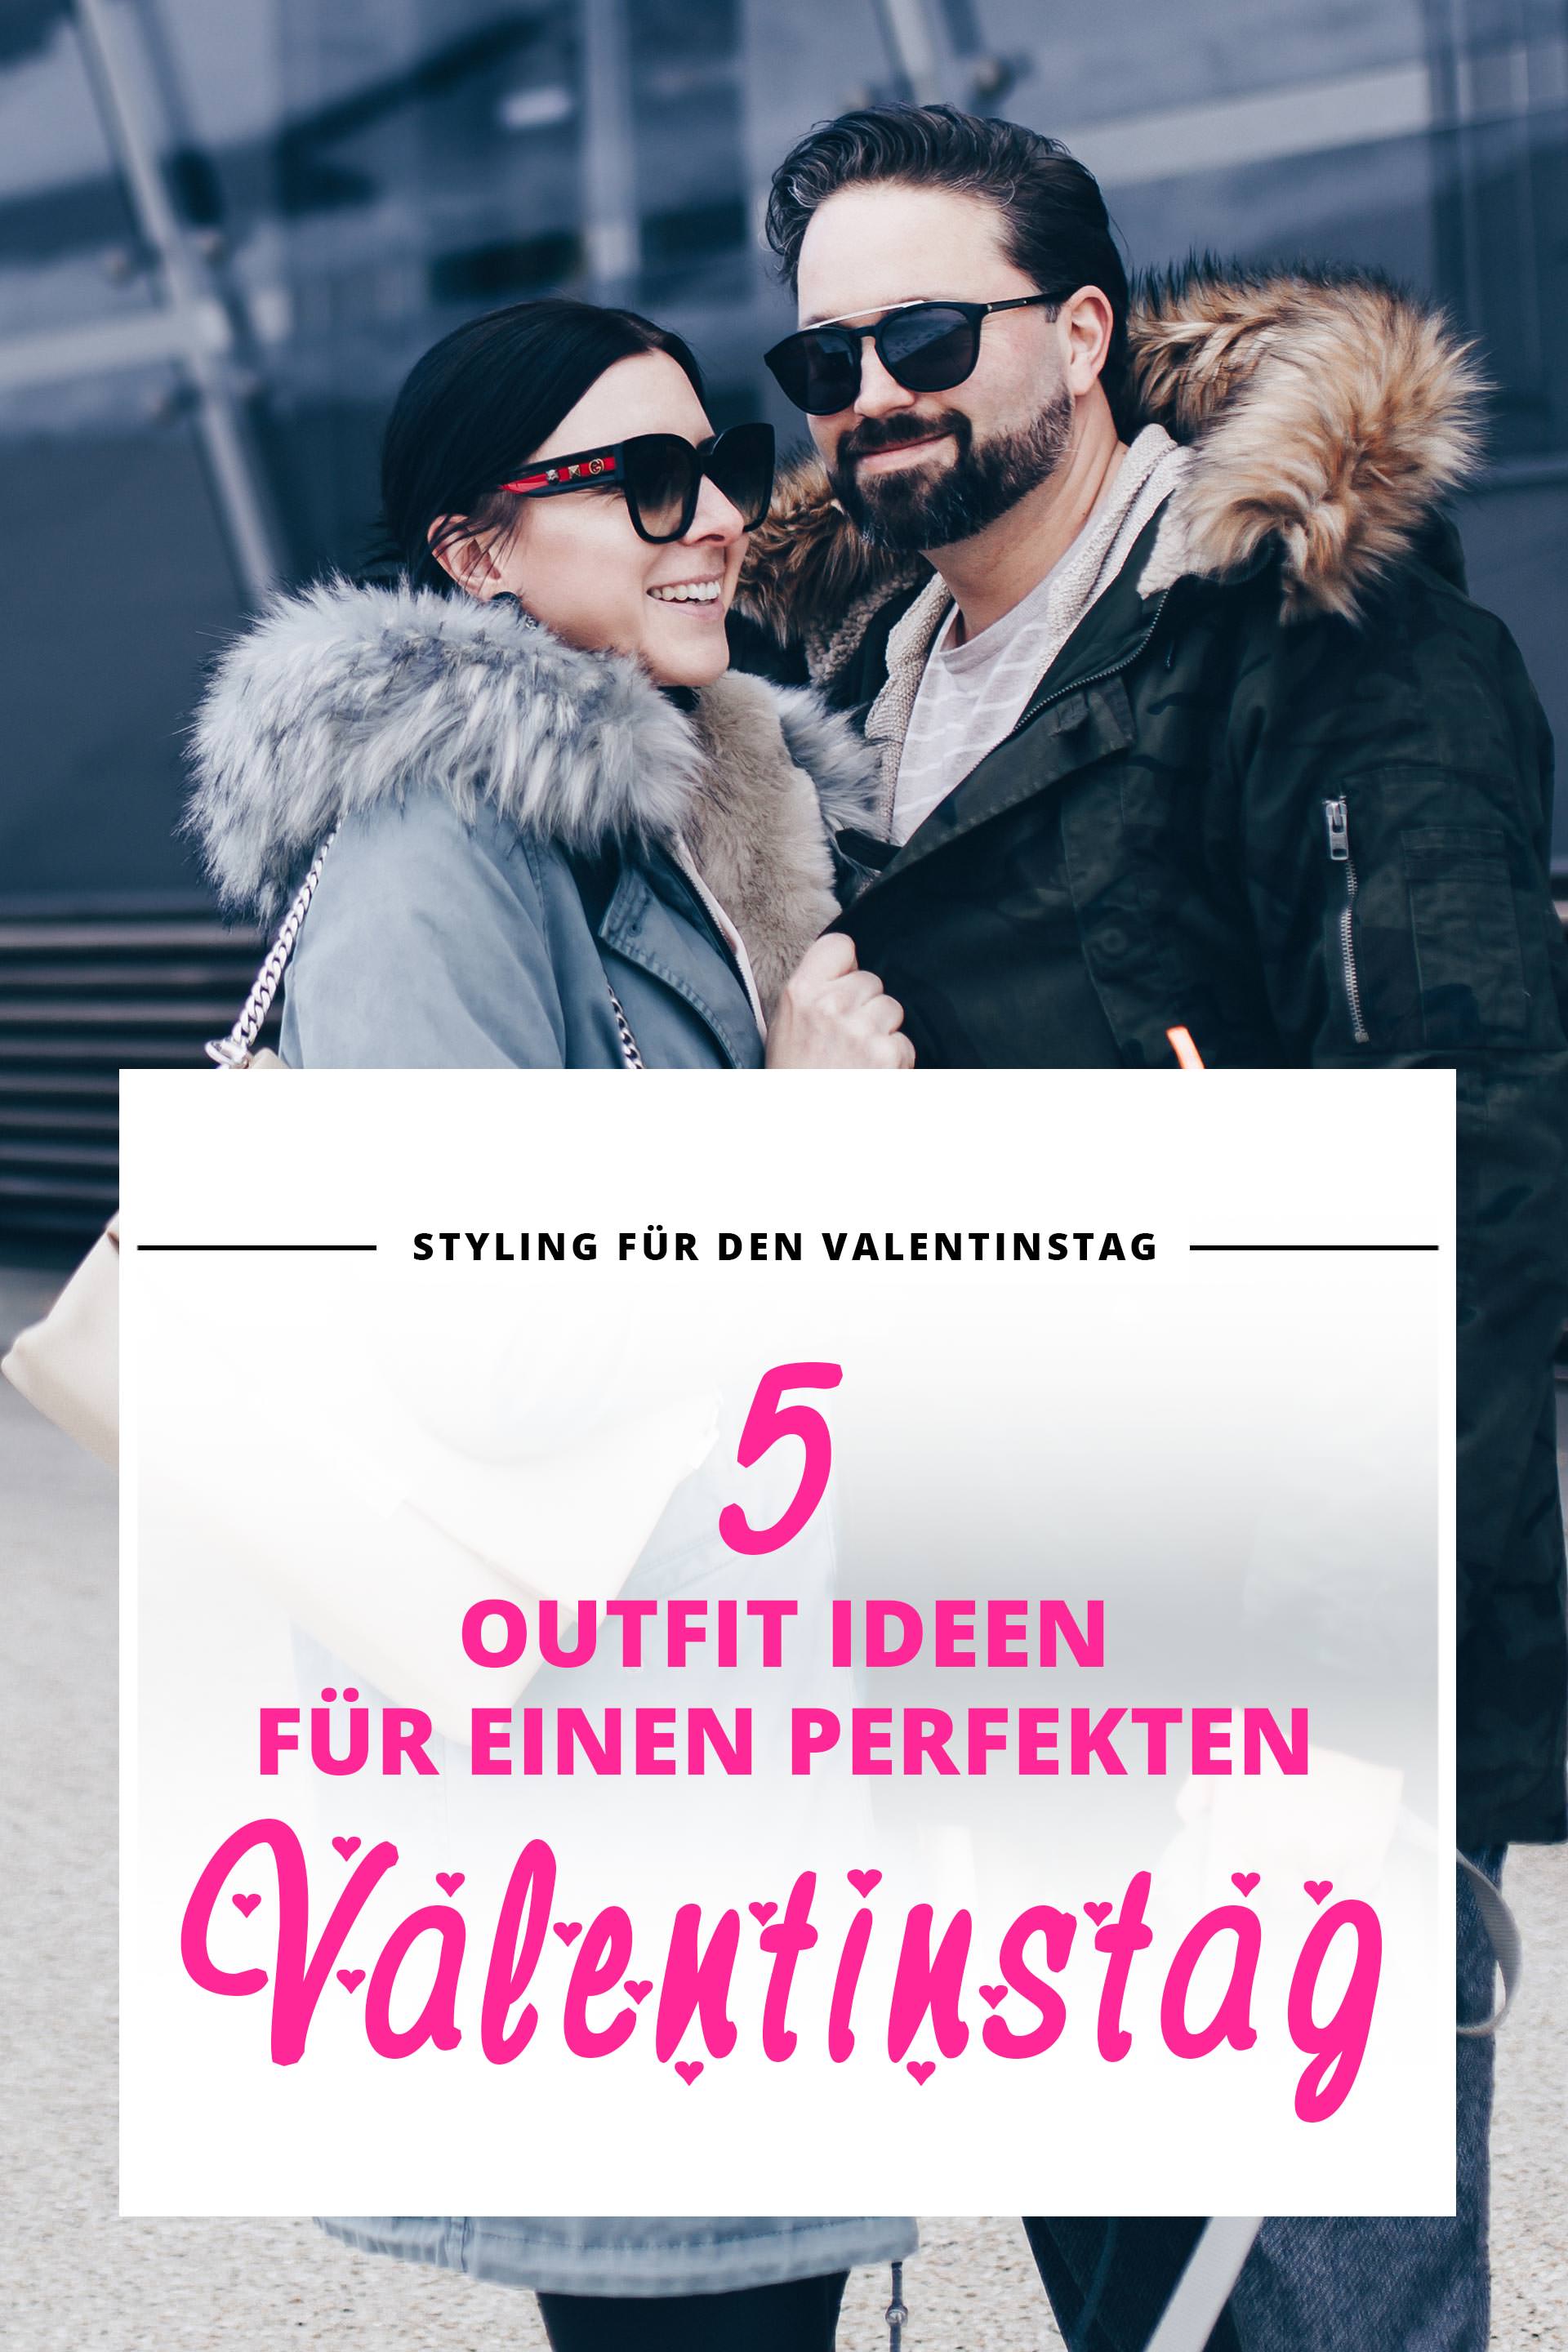 perfektes Outfit für den Valentinstag, Valentinstag Outfit Ideen und Styling Tipps, Outfit Inspirationen, Fashion Blog, Modeblog, Outfits Blog, www.whoismocca.com